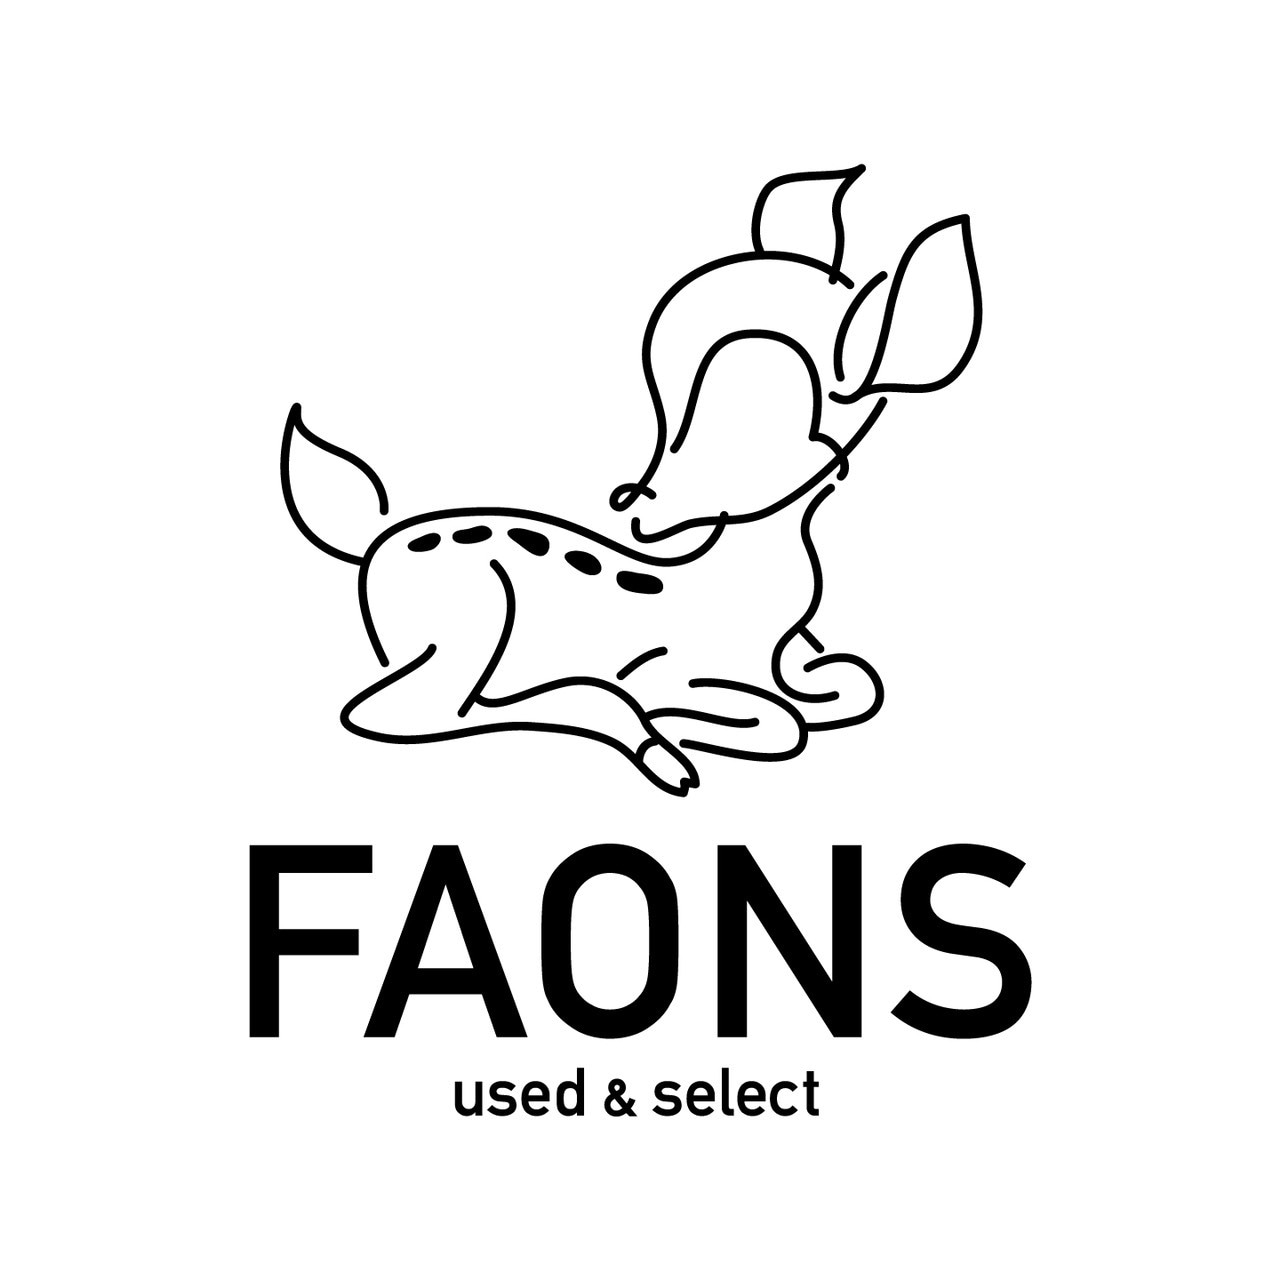 FAONS